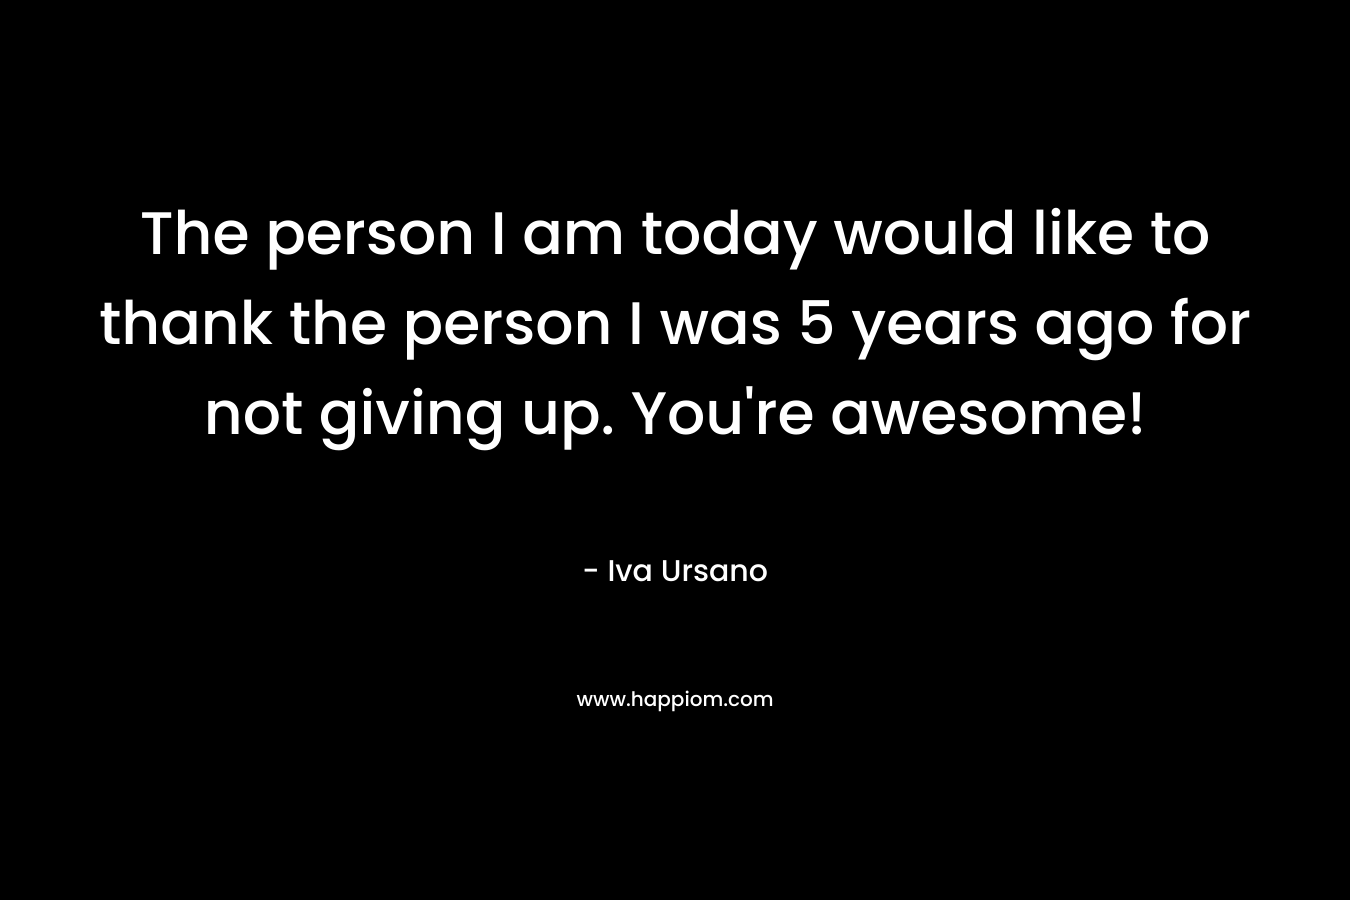 The person I am today would like to thank the person I was 5 years ago for not giving up. You're awesome!